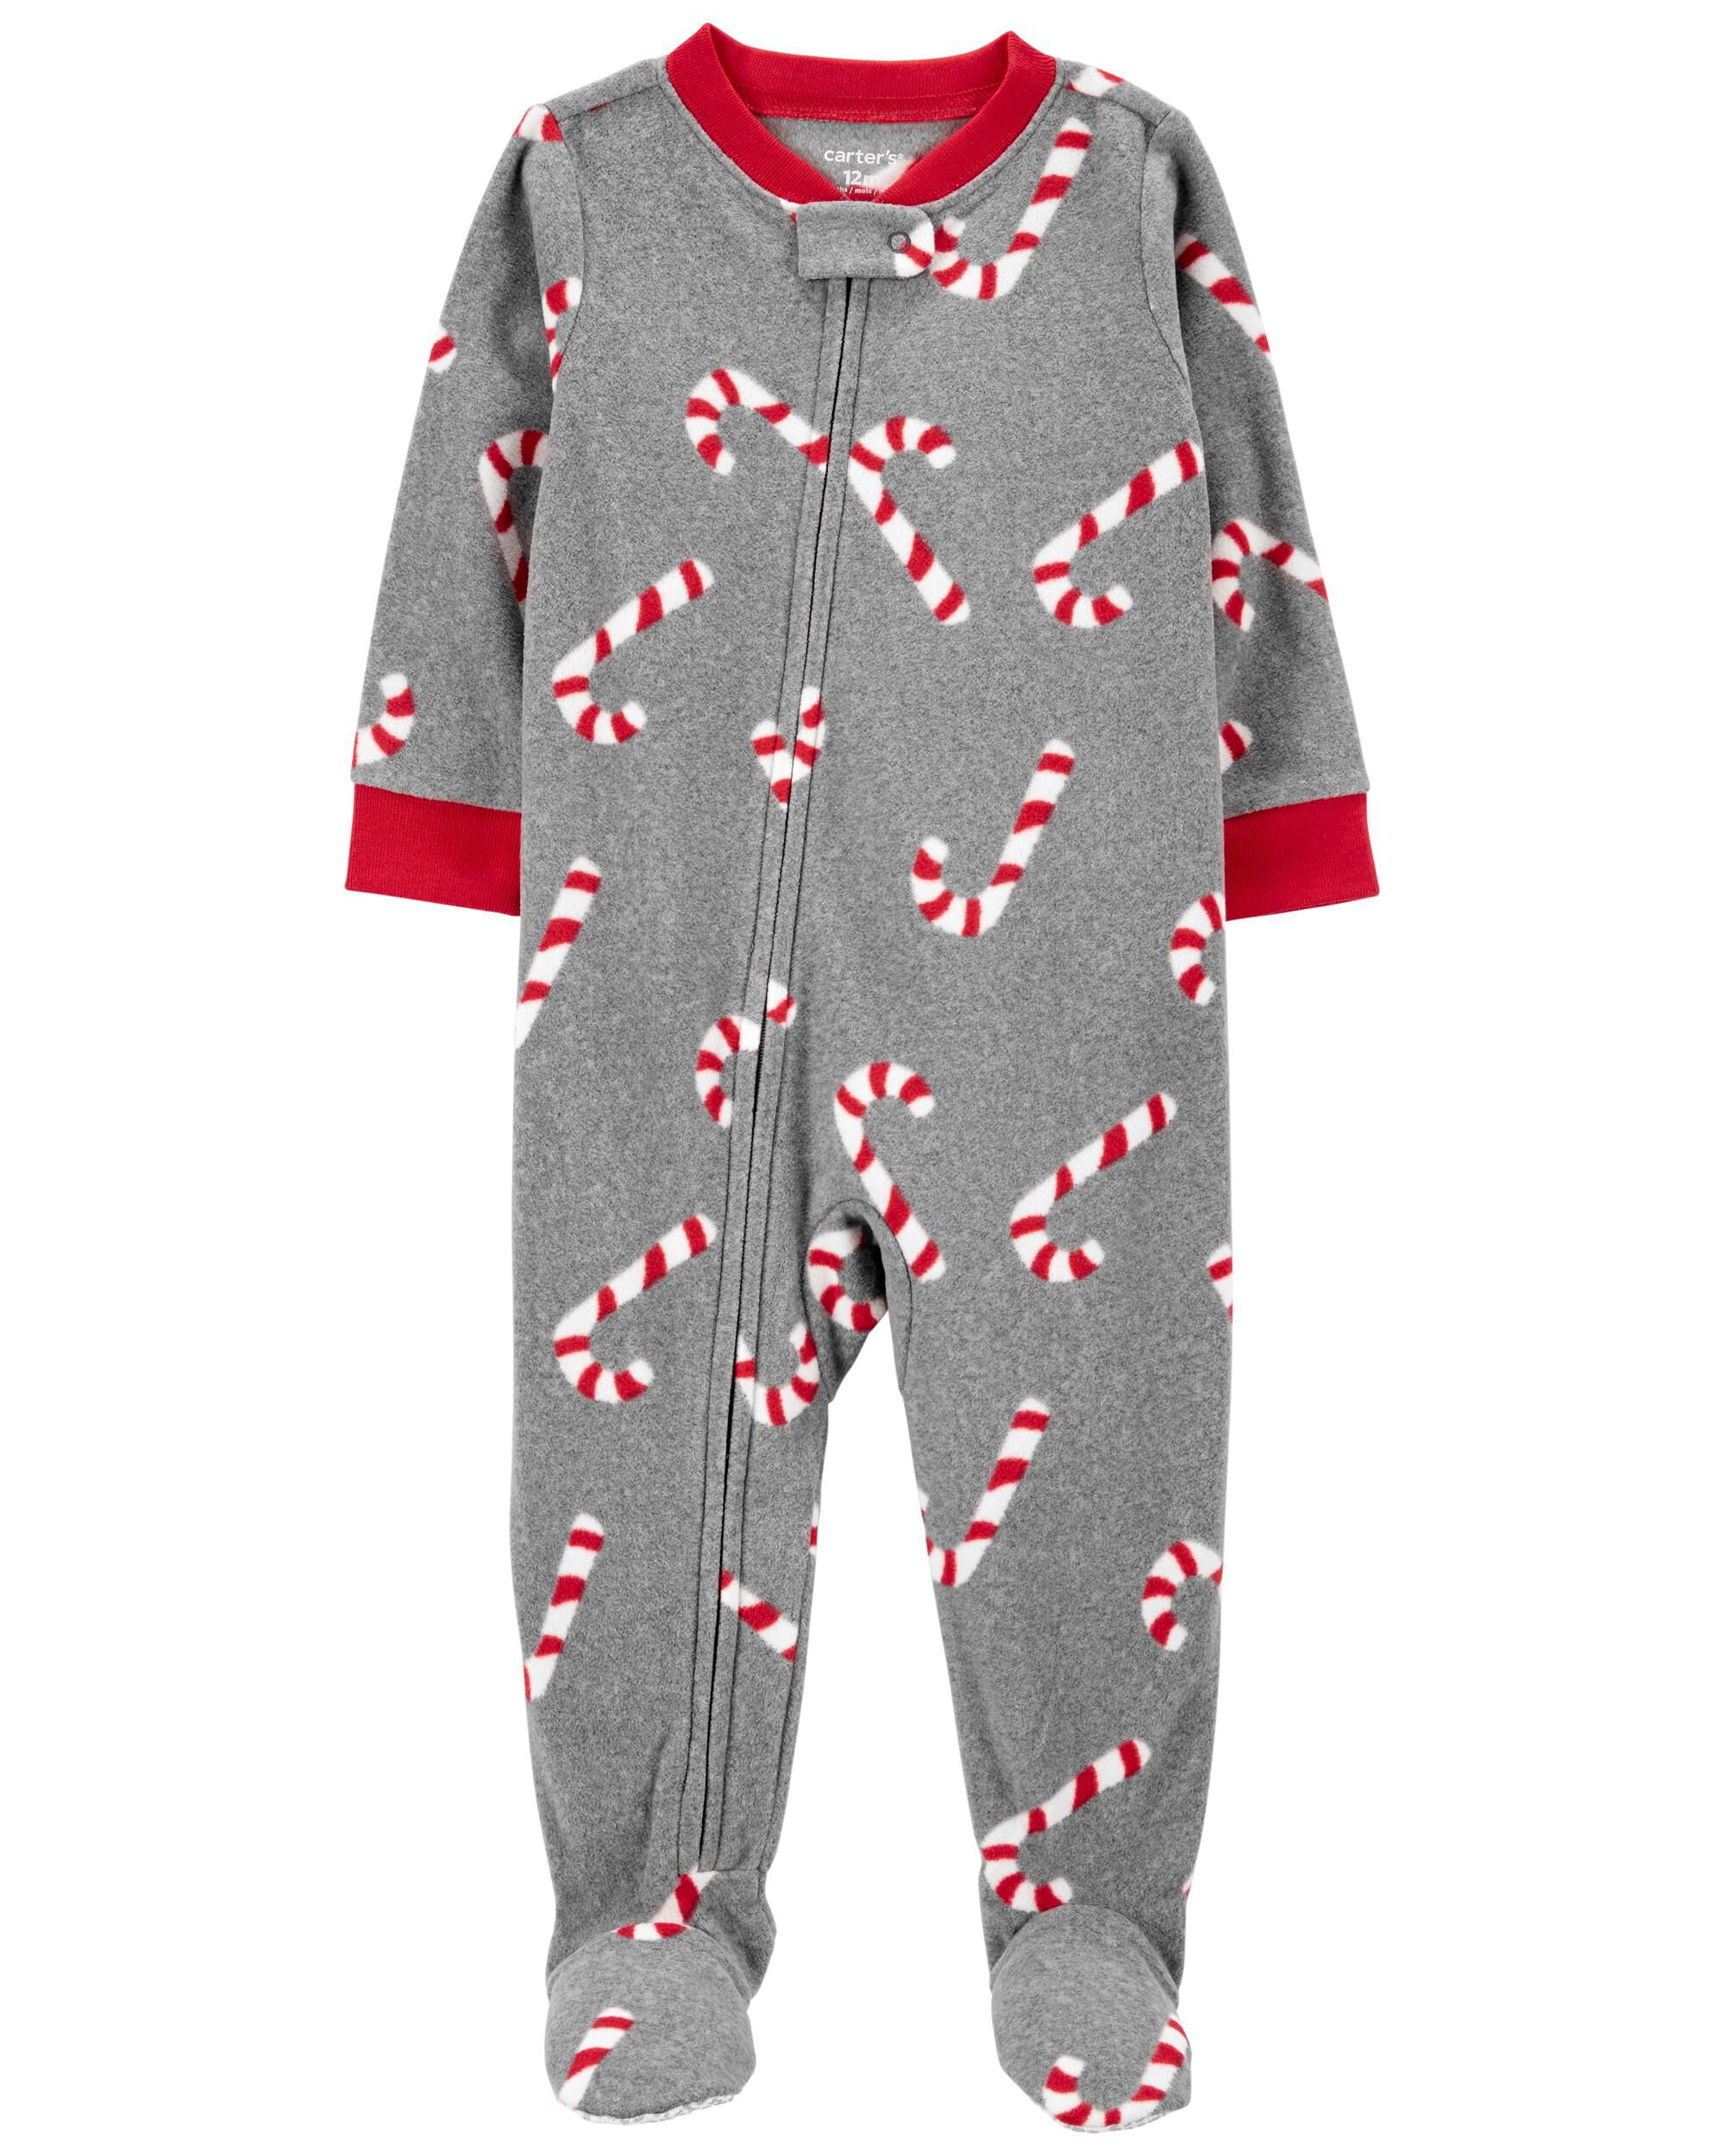 NWT Carter's Holiday Pajamas Girl's Size 18 Month 